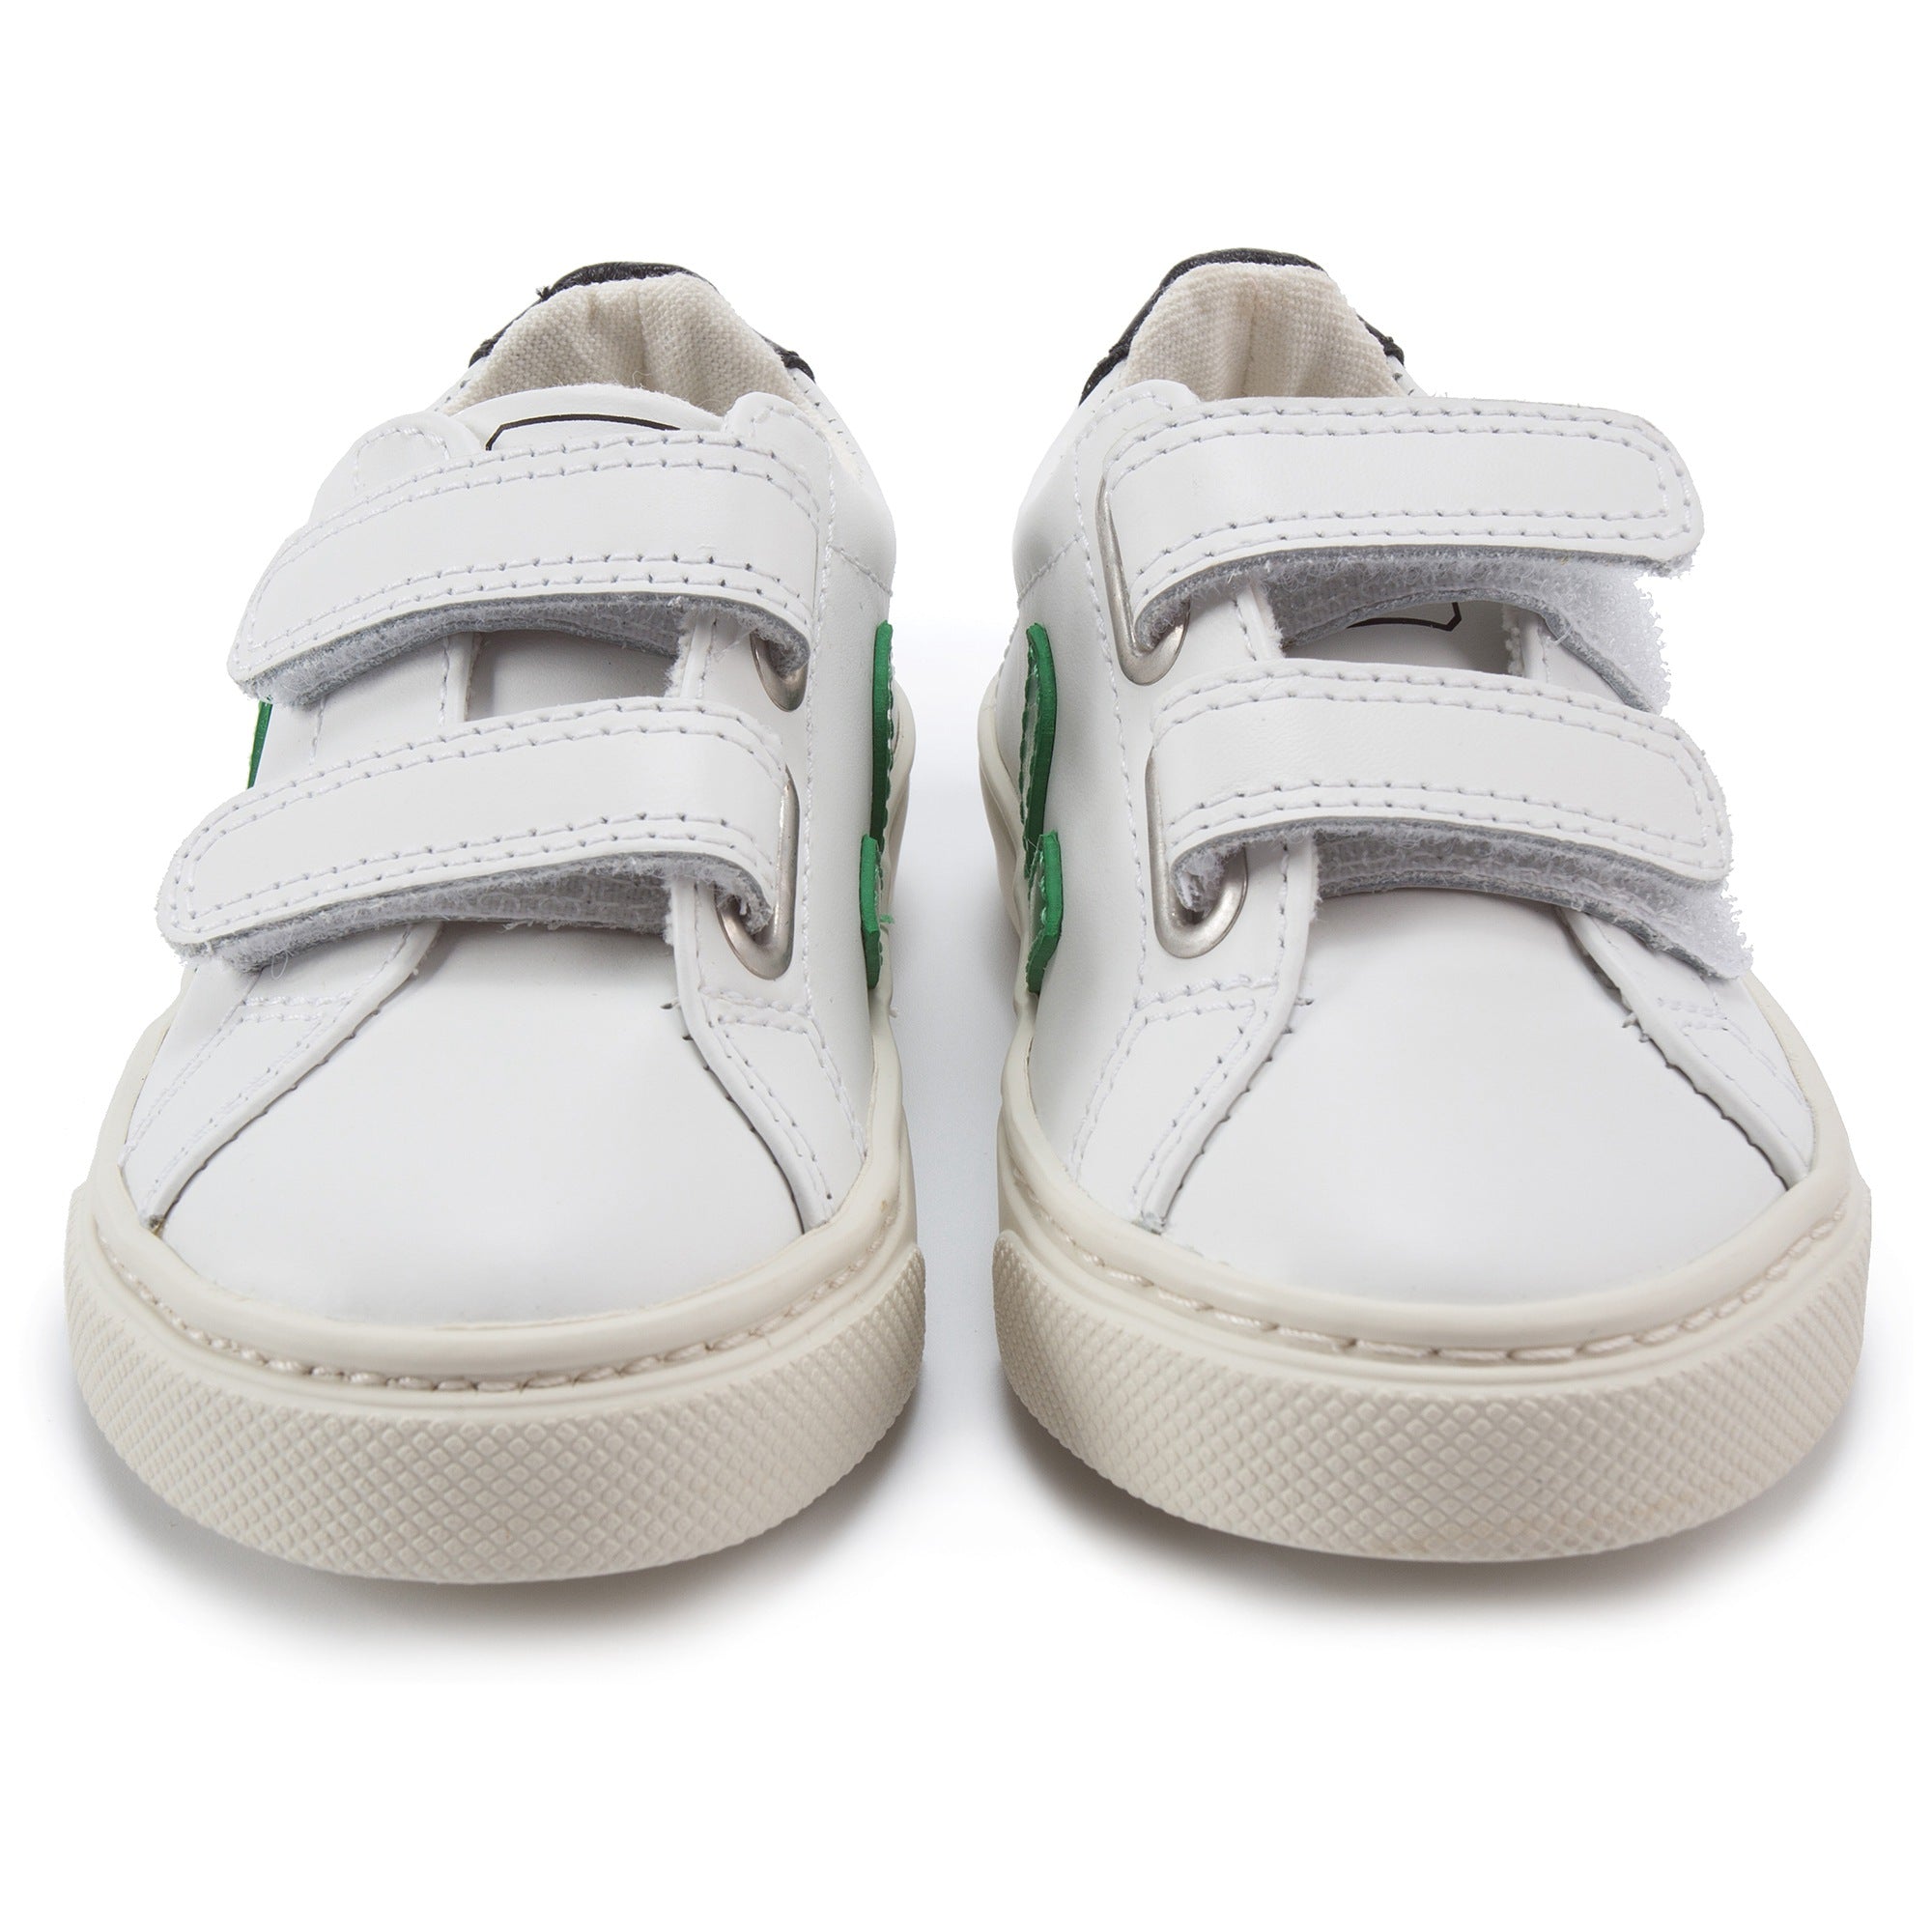 Girls & Boys White Leather Velcro With Green "V" Shoes